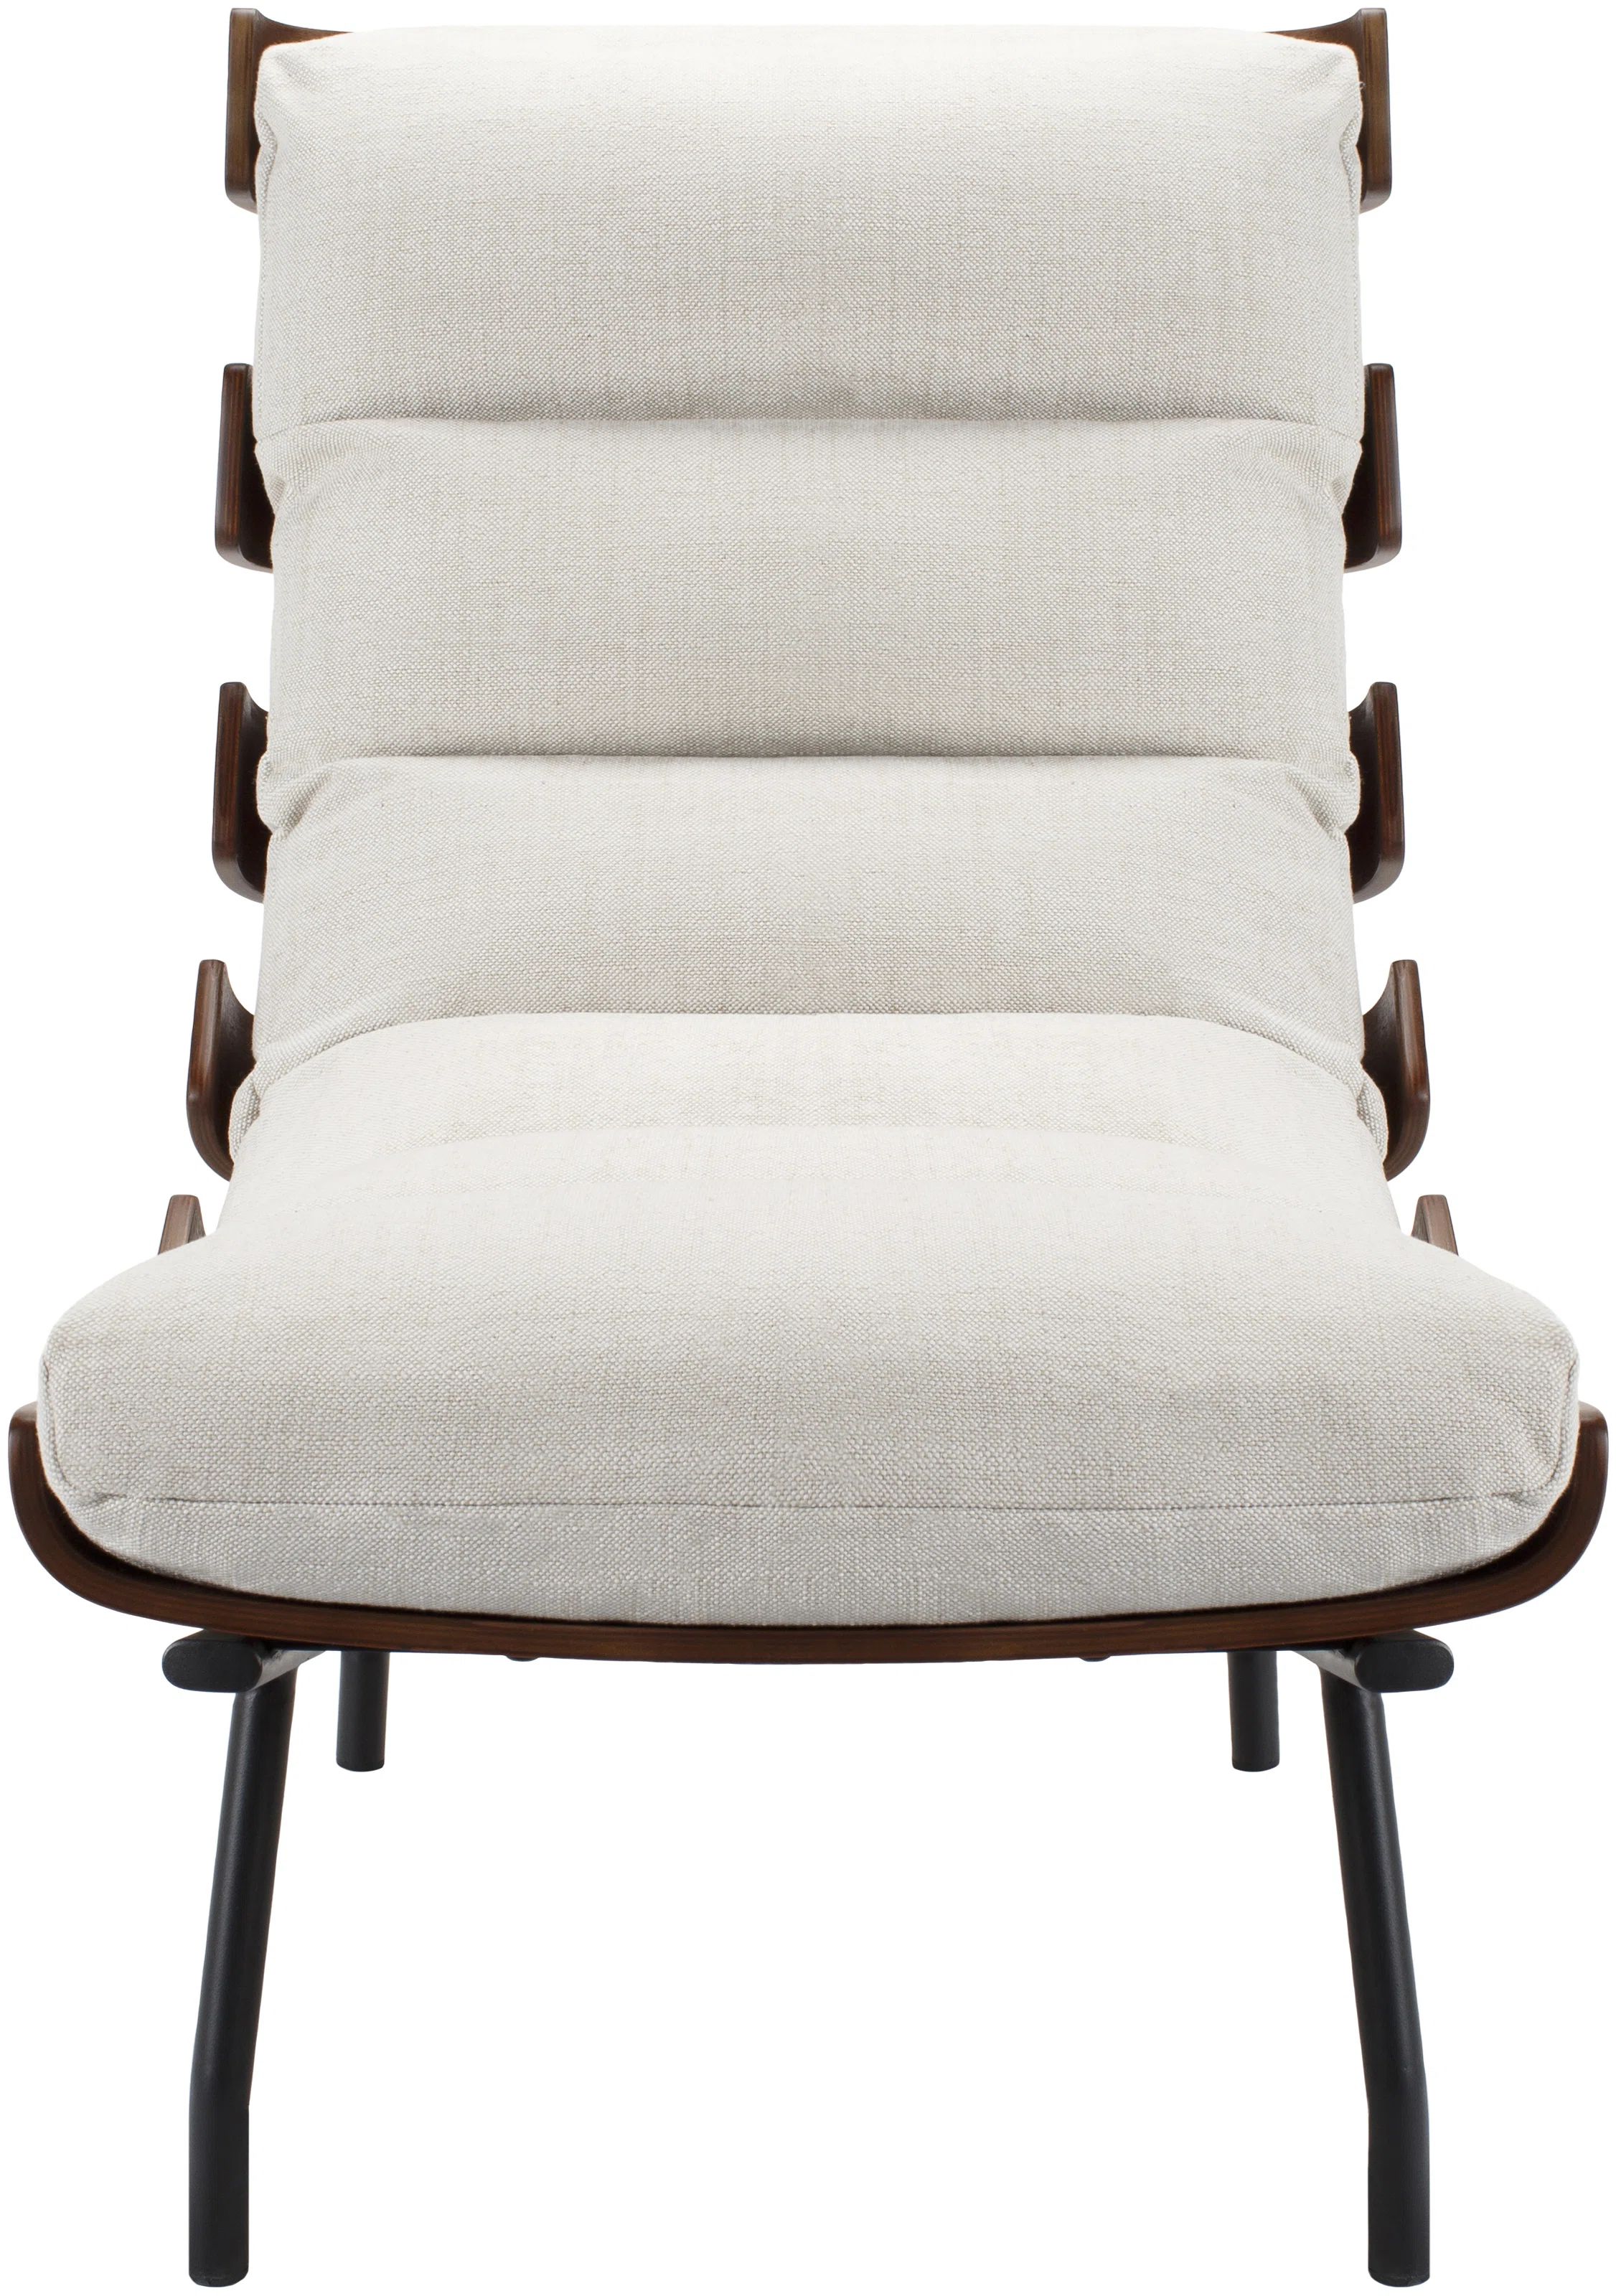 Malin Upholstered Accent Chair | Wayfair North America